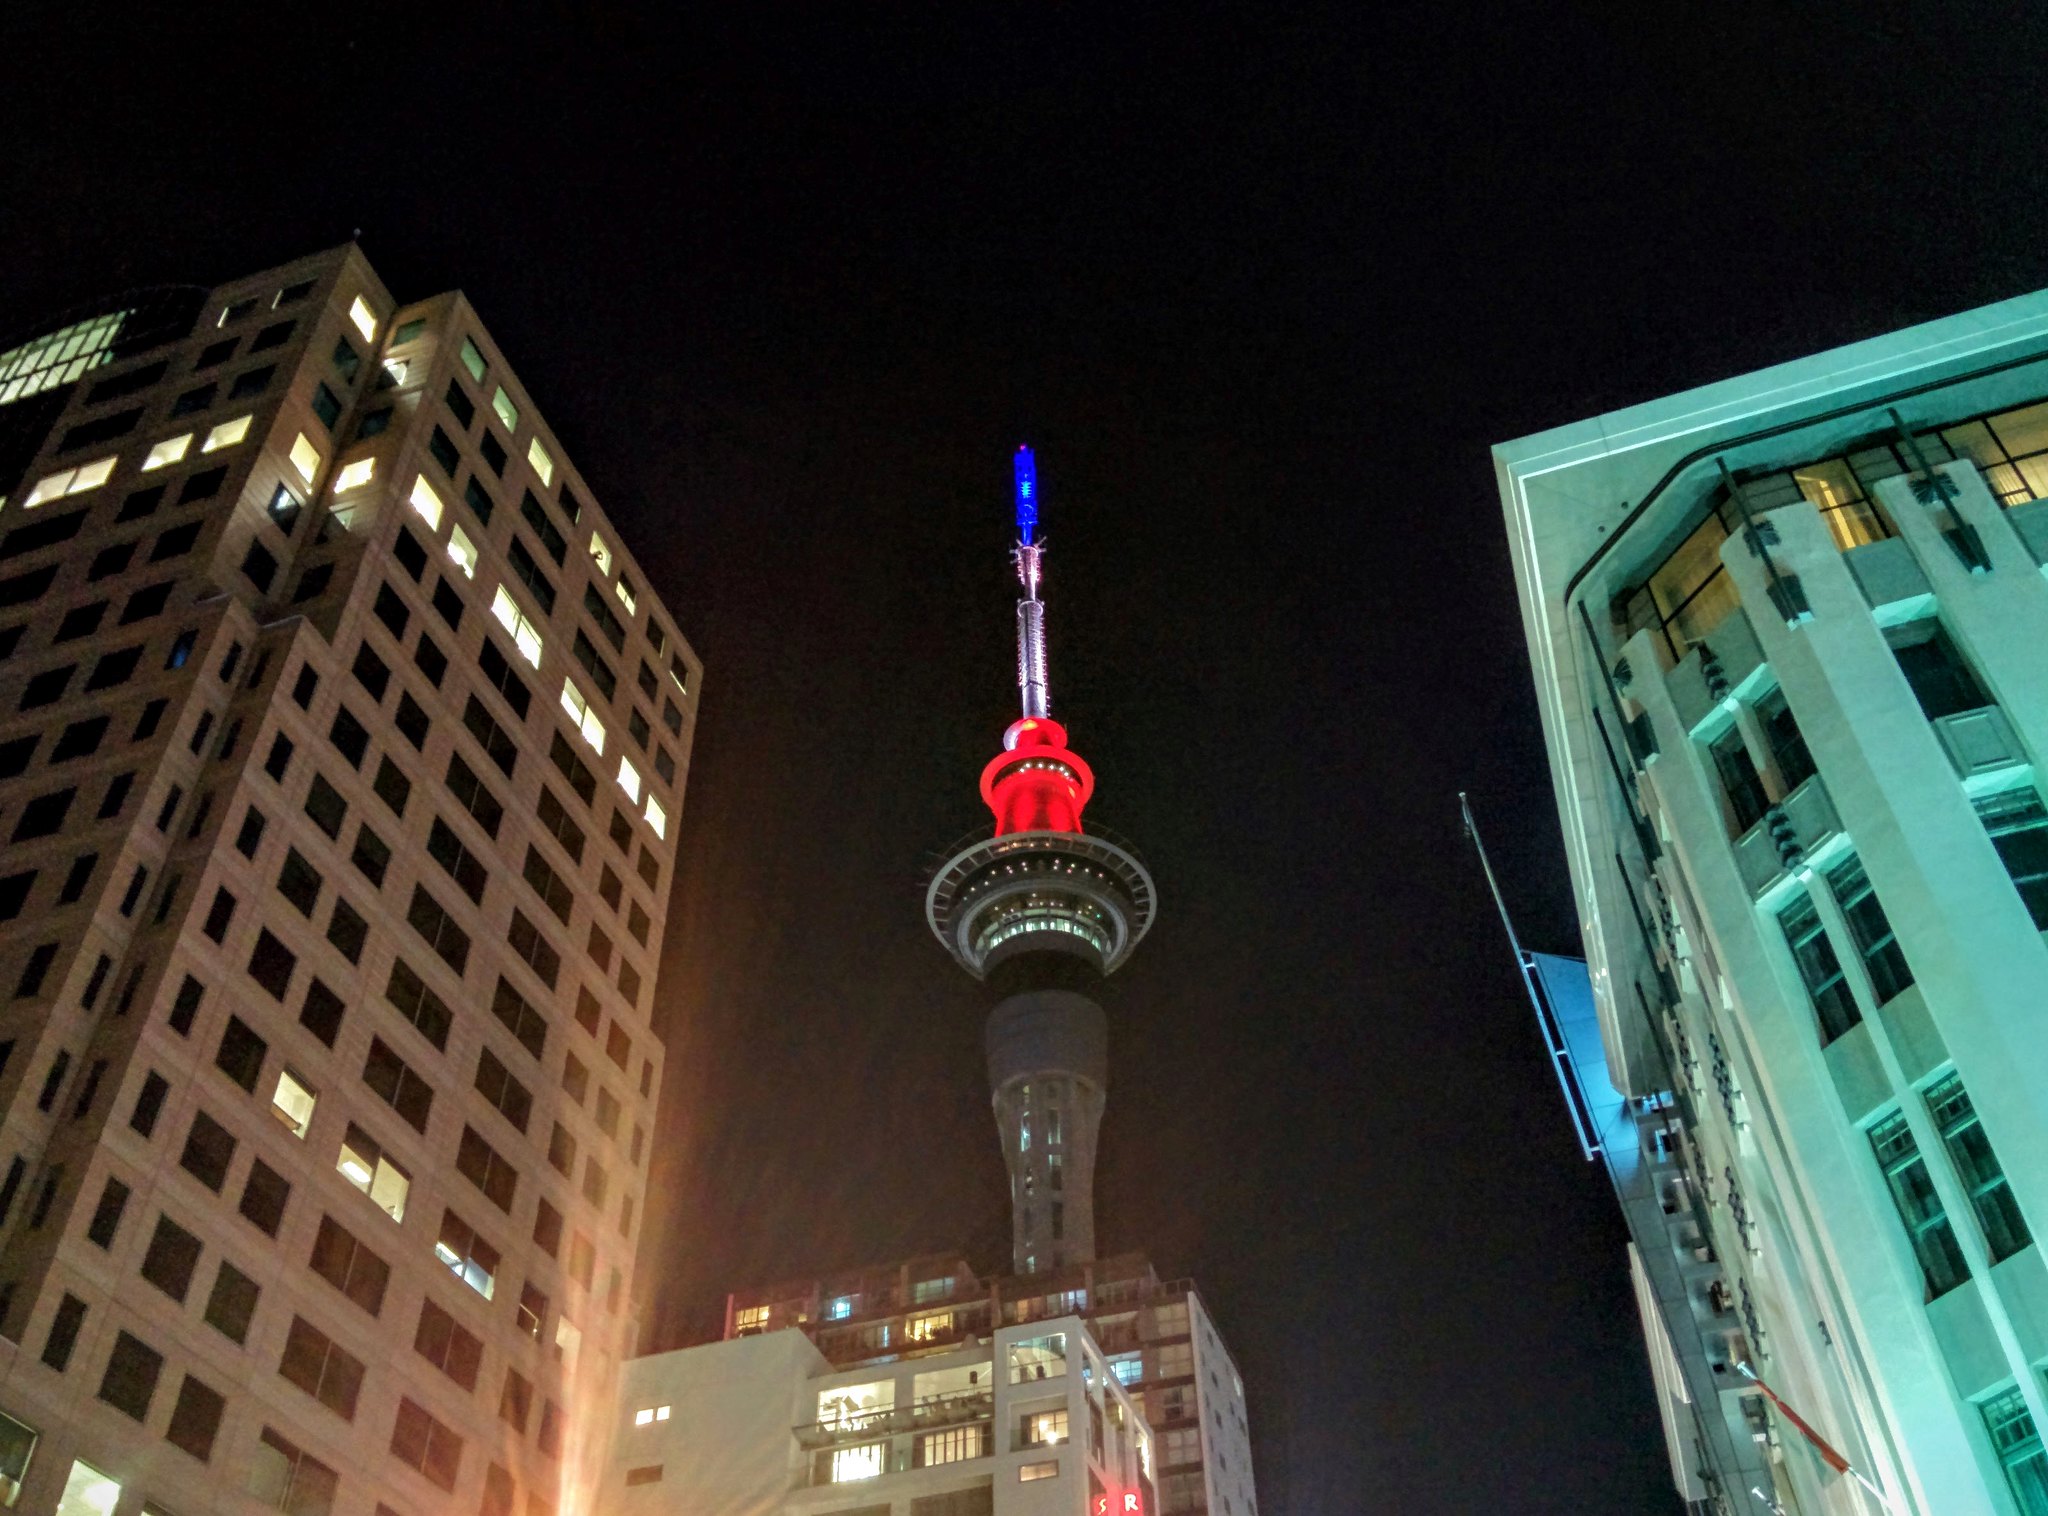 The Sky Tower lit up in tricolore